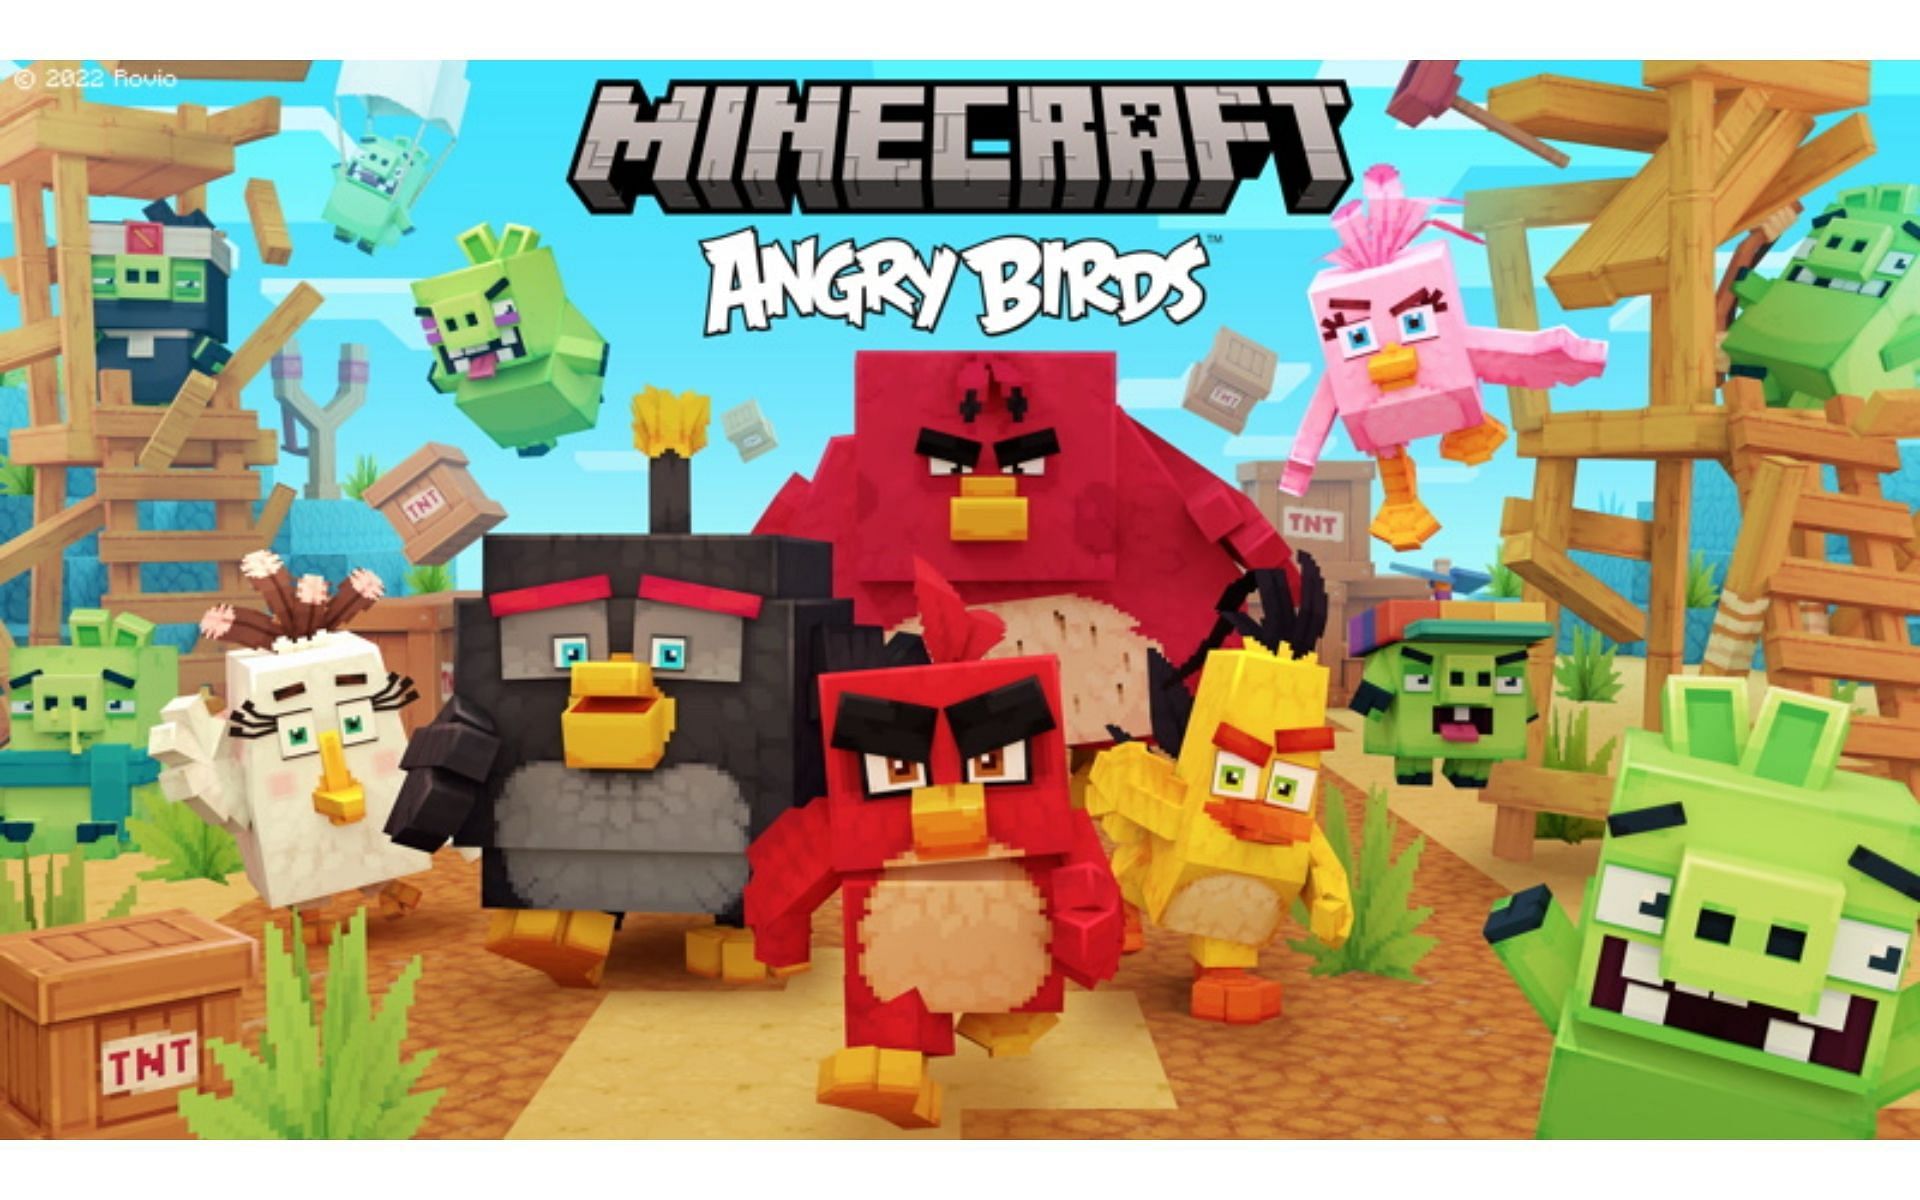 The destructive nature of the angry birds brought to the blocky world (Image via Mojang)